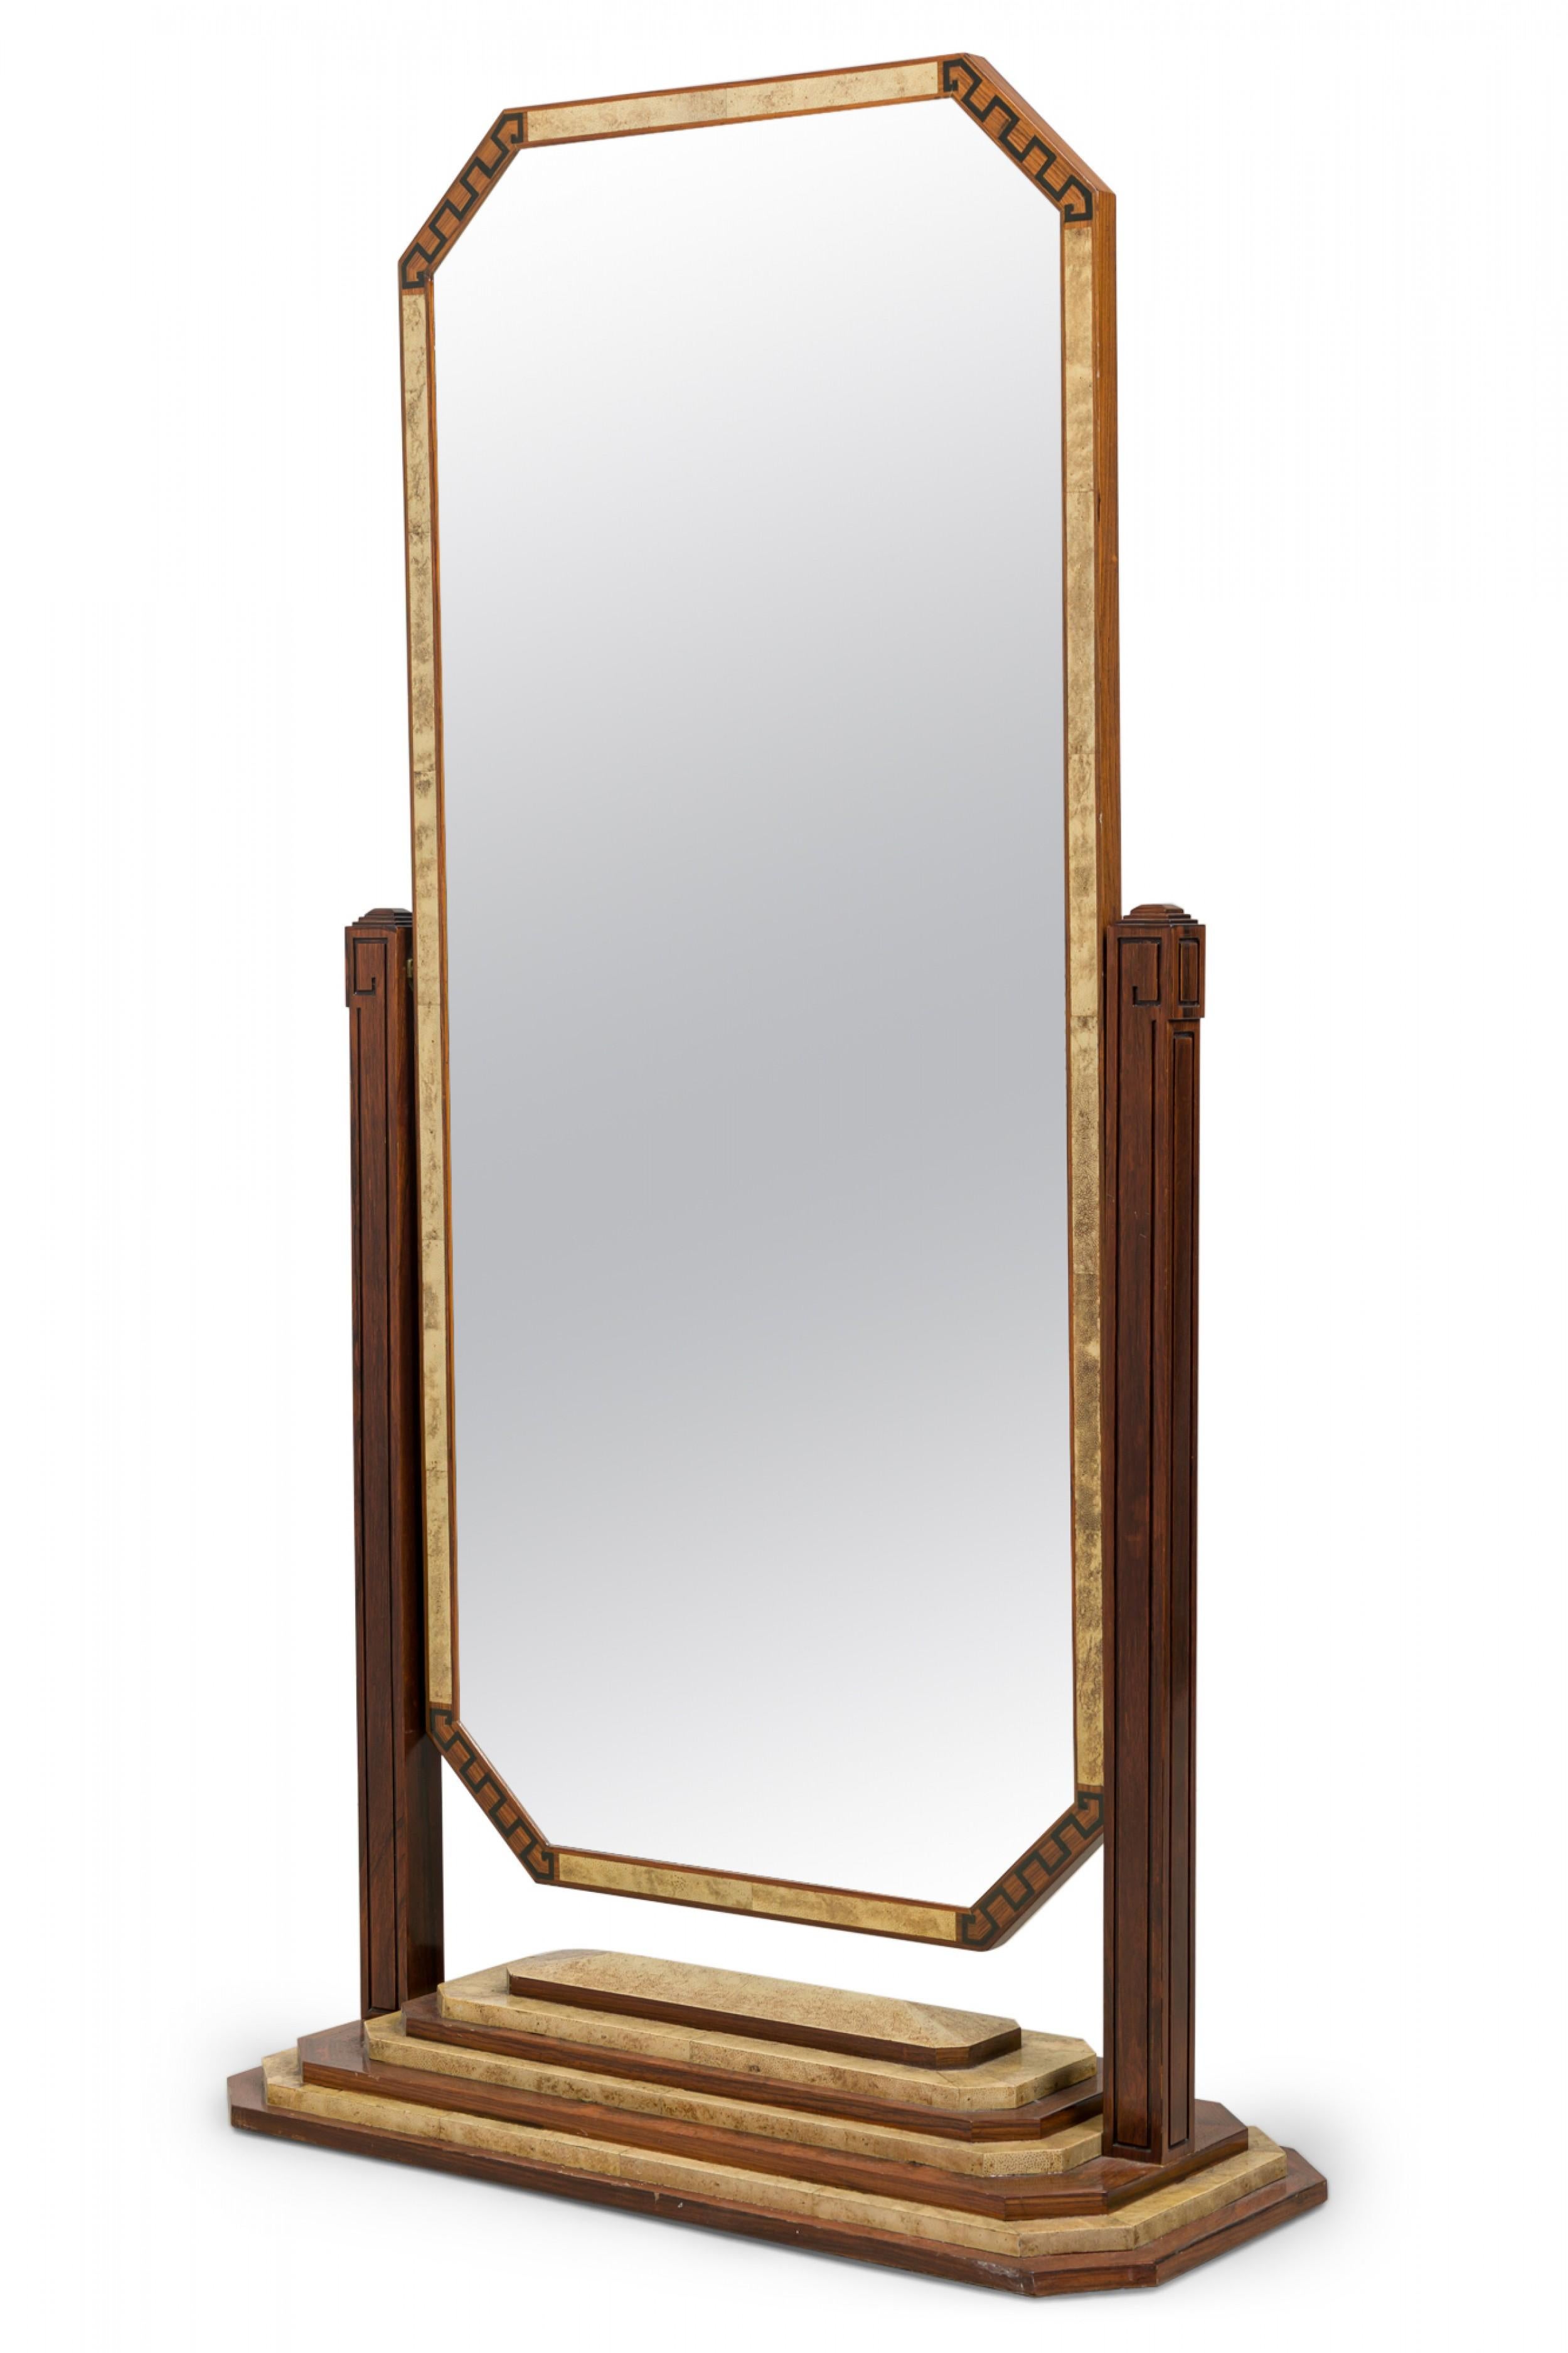 French Art Deco (1930s) shagreen and rosewood octagonal mirror with inlaid keyfret borders and shagreen panels along the frame, hinged to pivot by two parallel supports, resting on stepped wood and shagreen base.